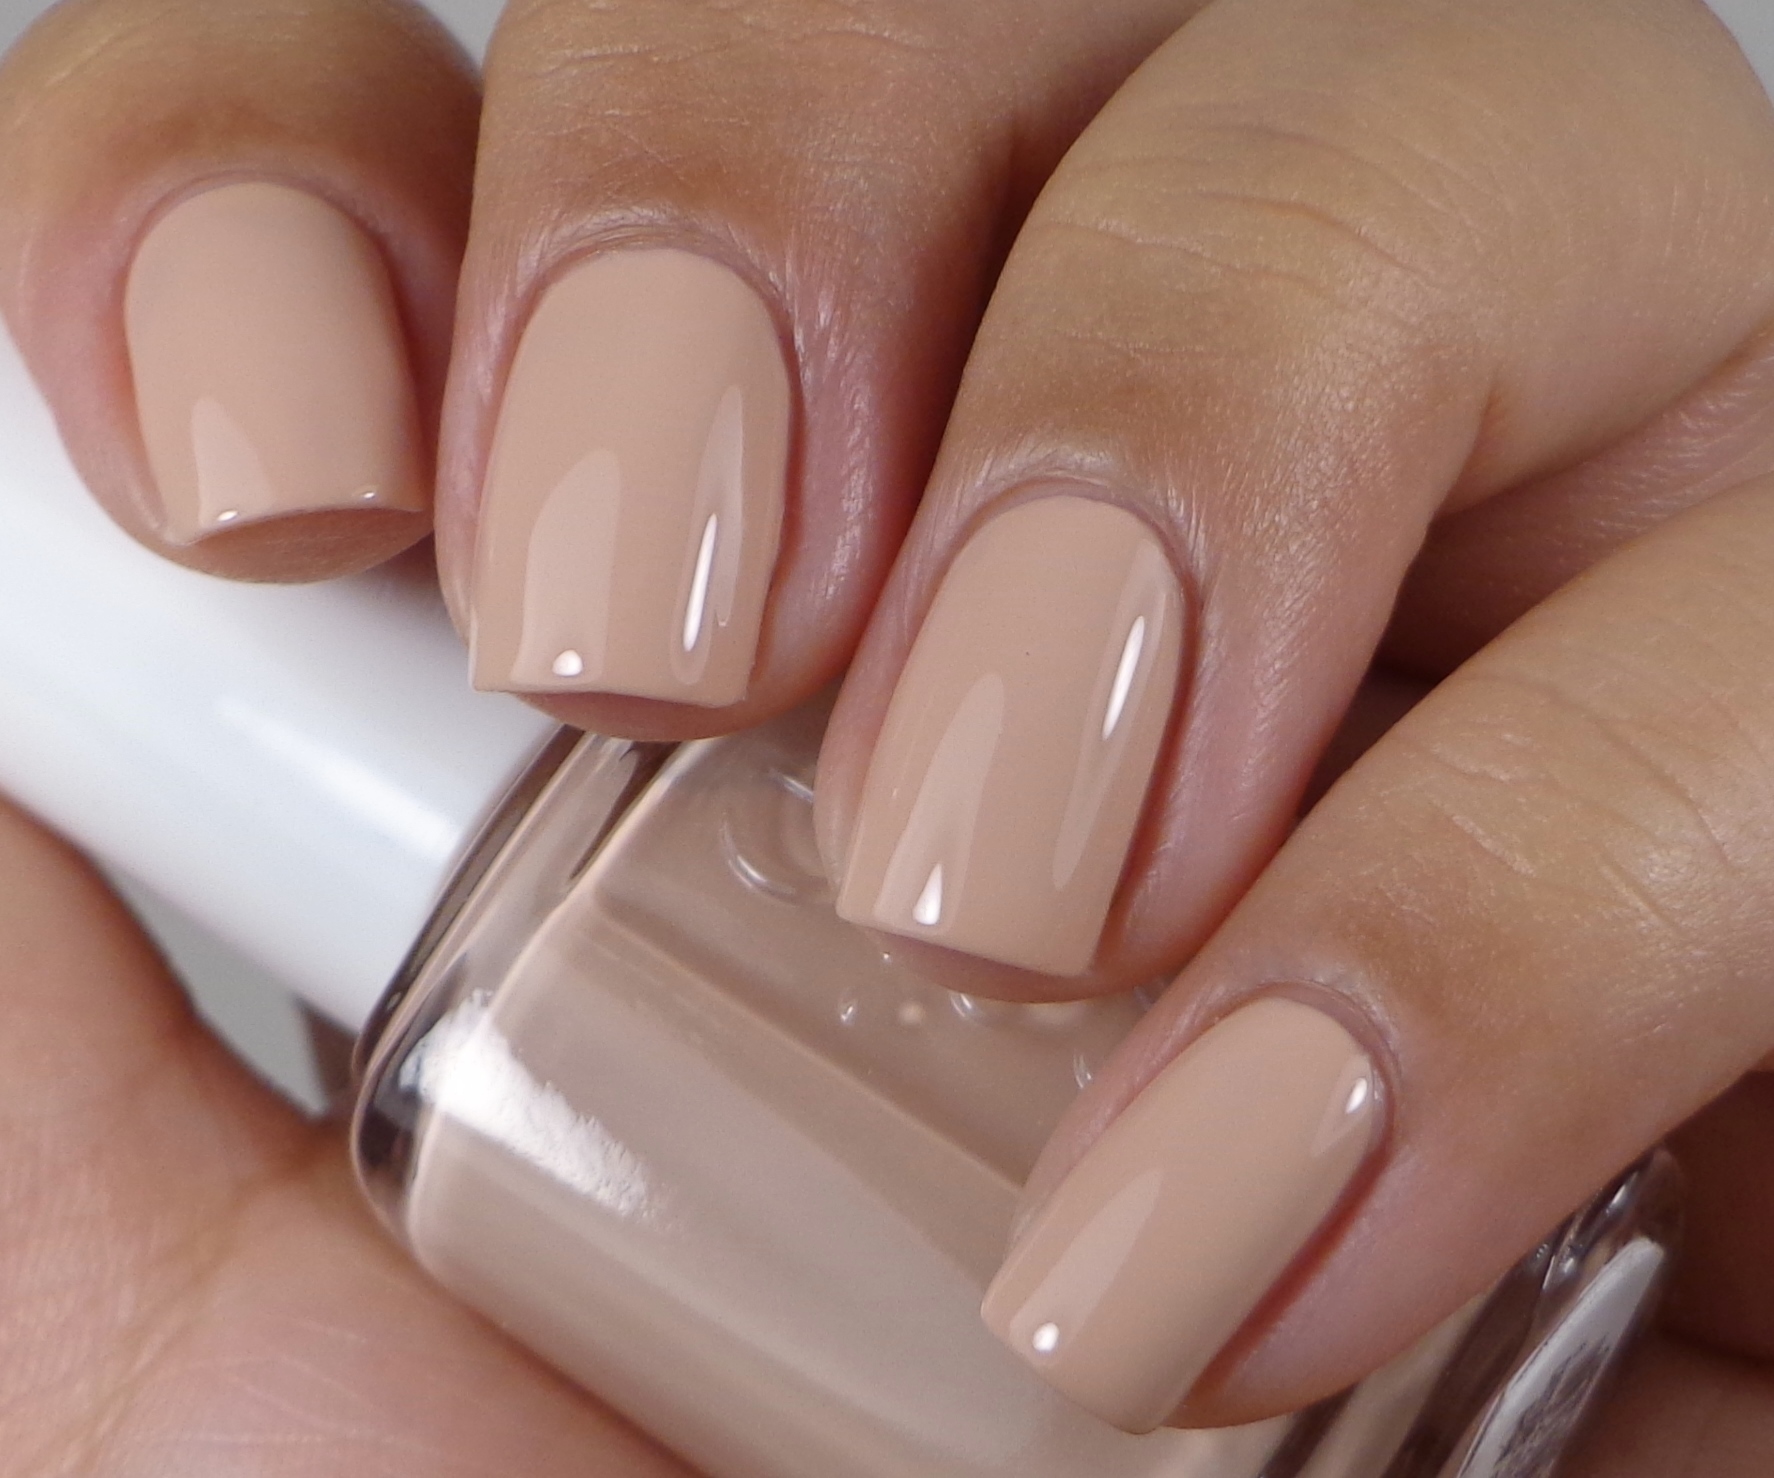 Essie Nail Polish in "Tuck It In My Tux" - wide 7